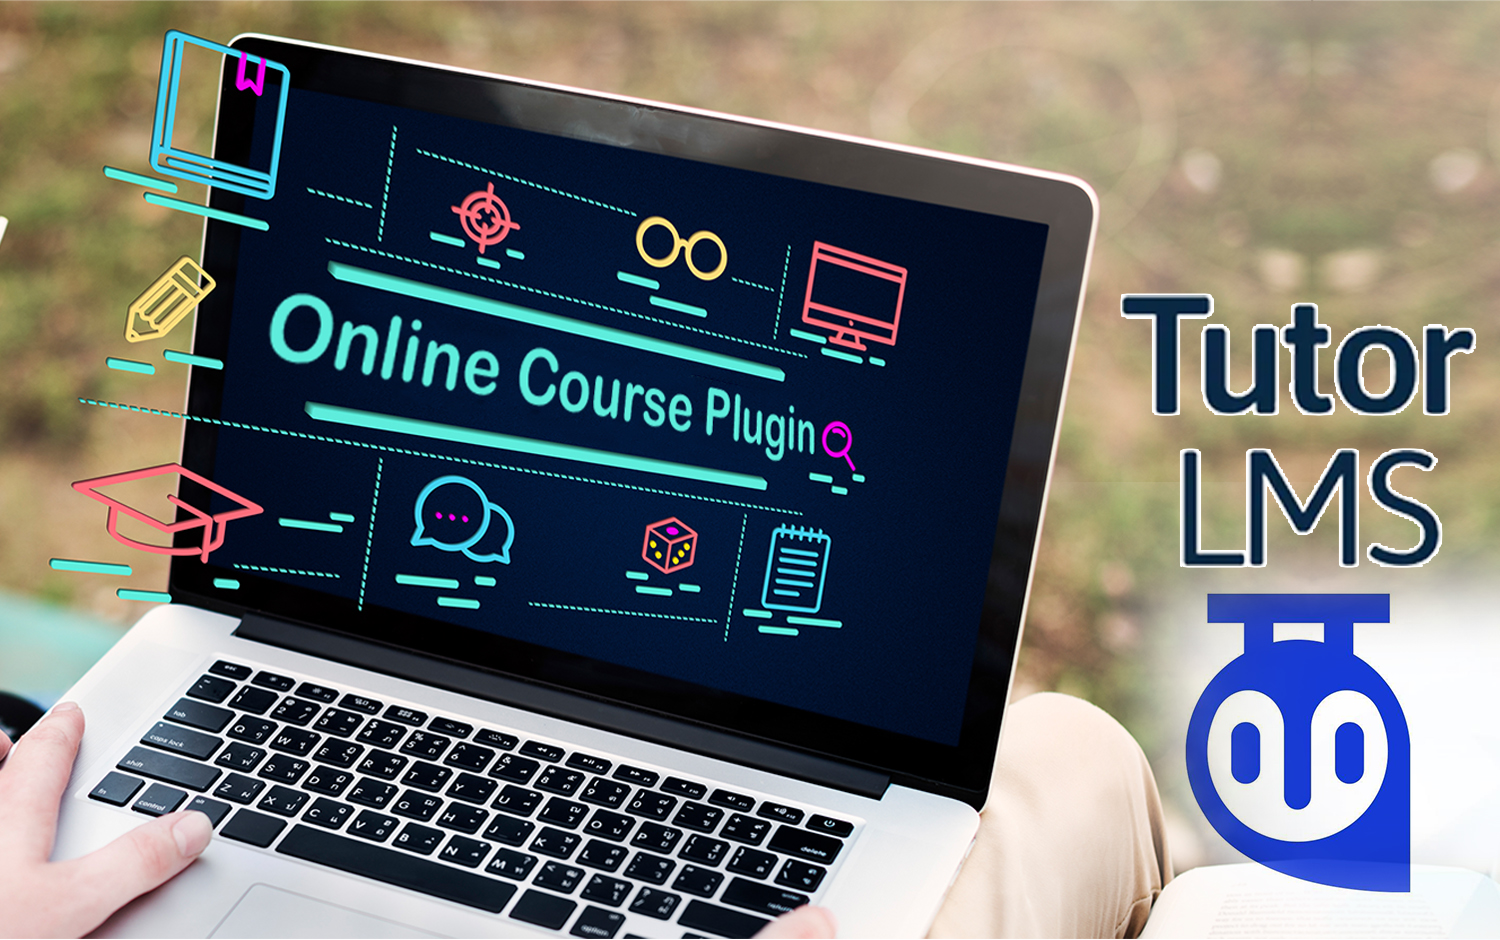 The Best Free Online Course Plugin for WordPress - Tutor LMS Introduction